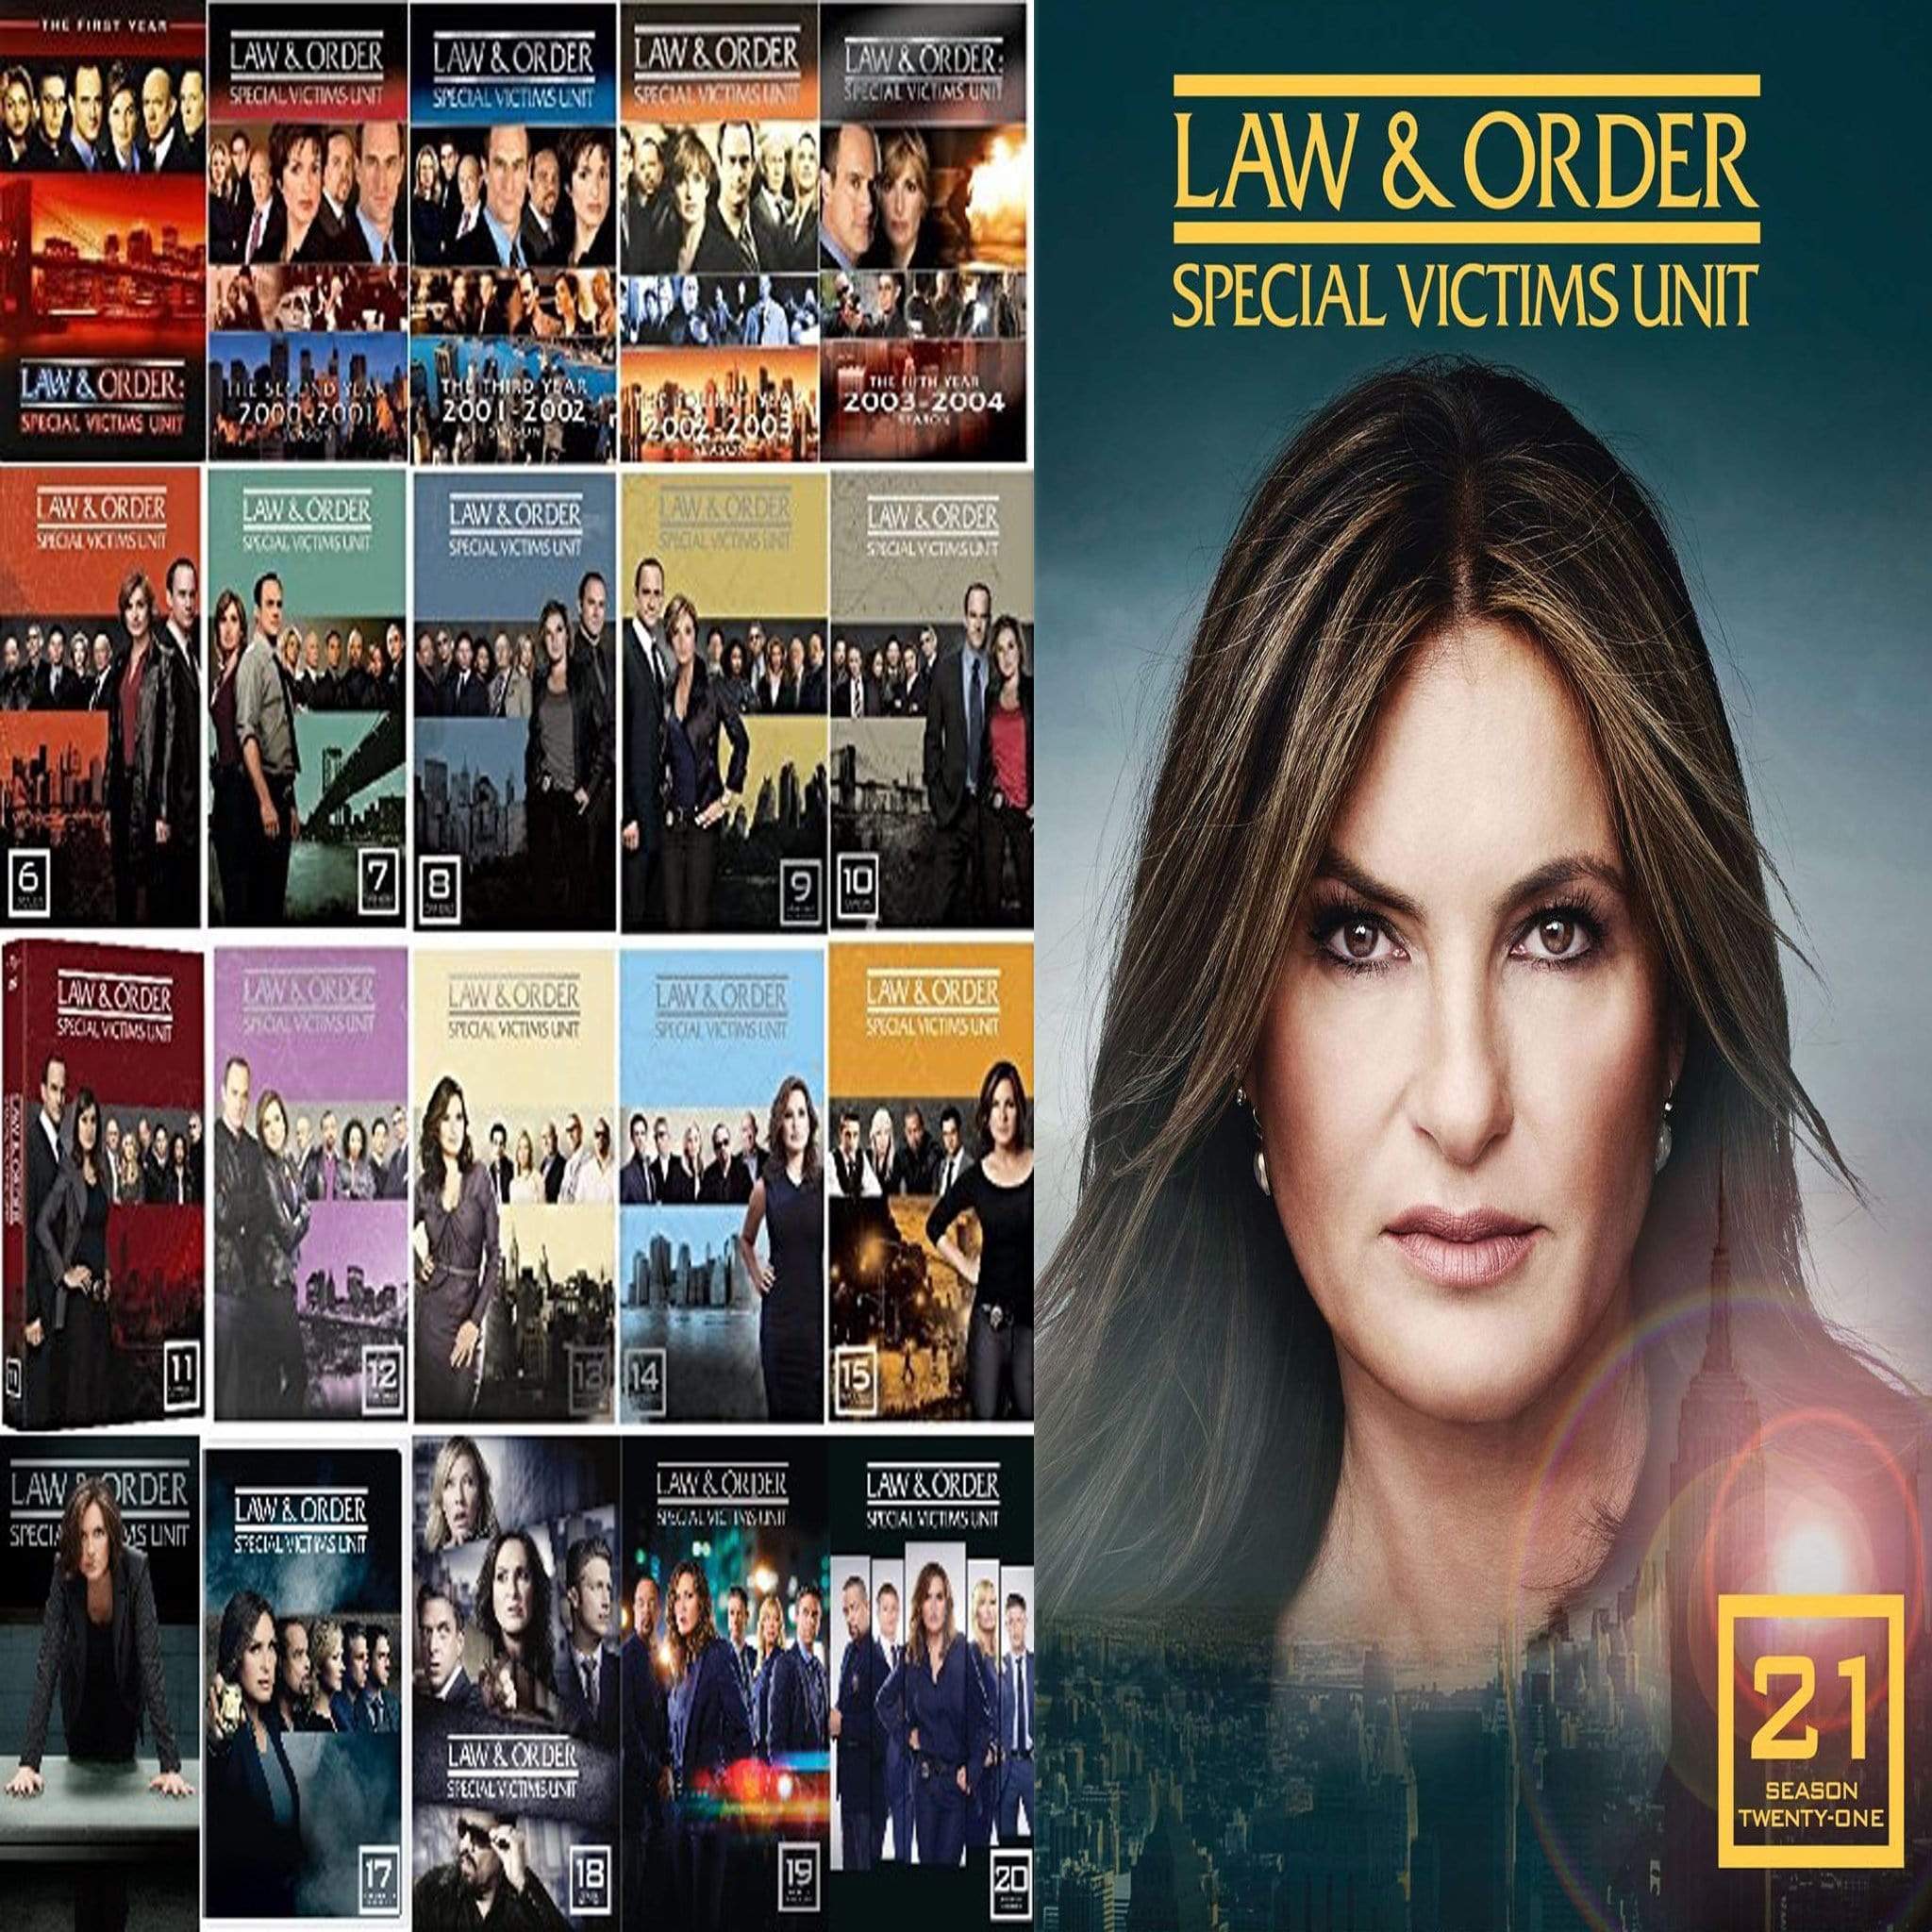 Law & Order SVU Special Victims Unit Seasons 1-21 On DVD Universal Studios DVDs & Blu-ray Discs